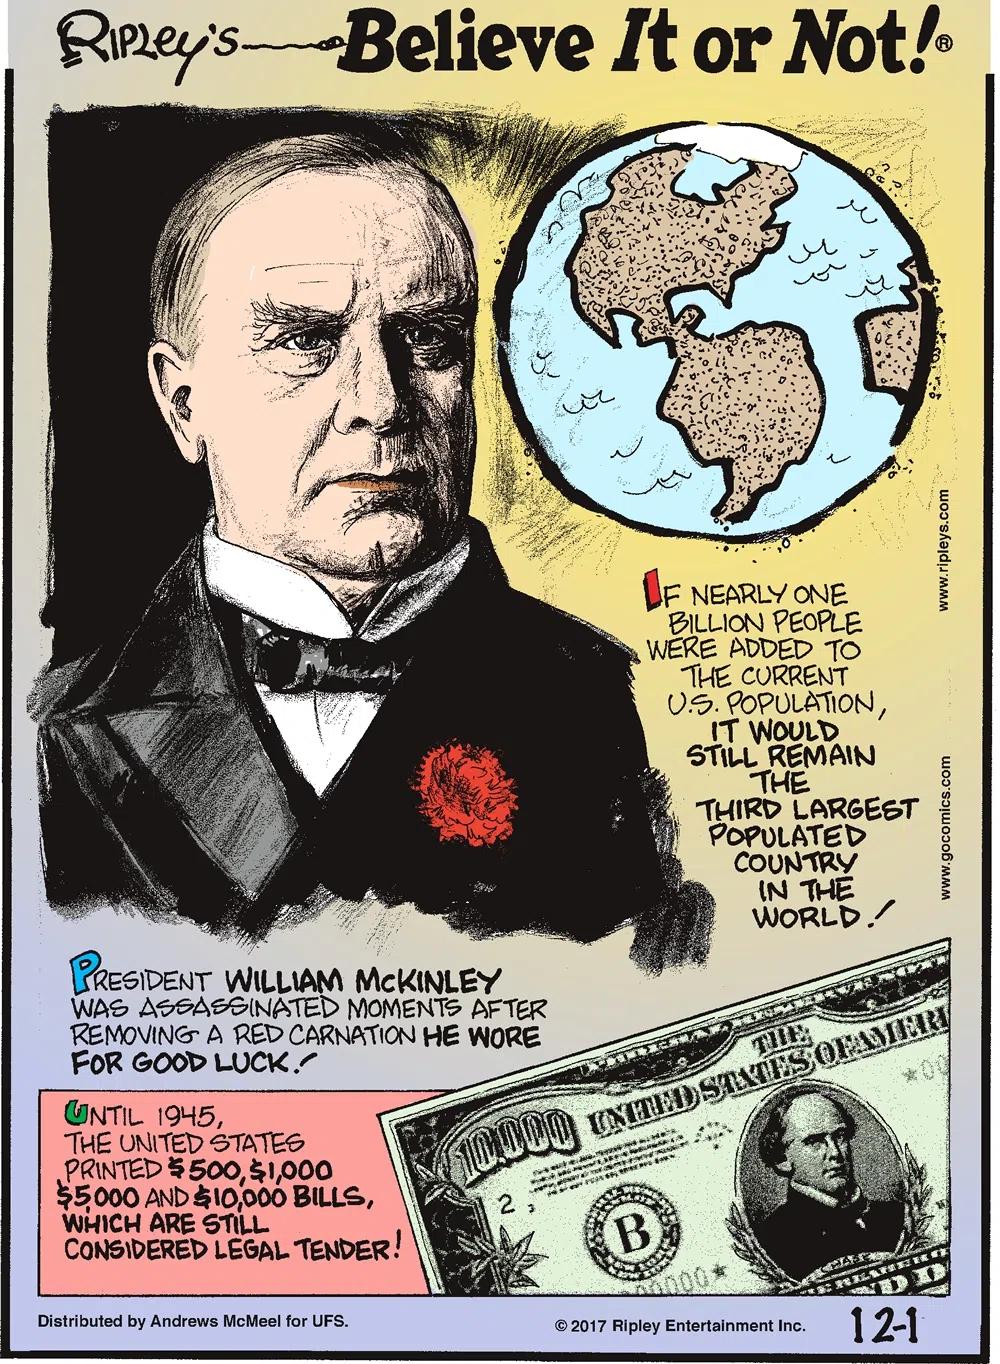 If nearly one billion people were added to the current U.S. population, it would still remain the third largest populated country in the world!-------------------- President William McKinley was assassinated moments after removing a red carnation he wore for good luck!-------------------- Until 1945, the United States printed $500, $1,000, $5,000 and $10,000 bills which are still considered legal tender!